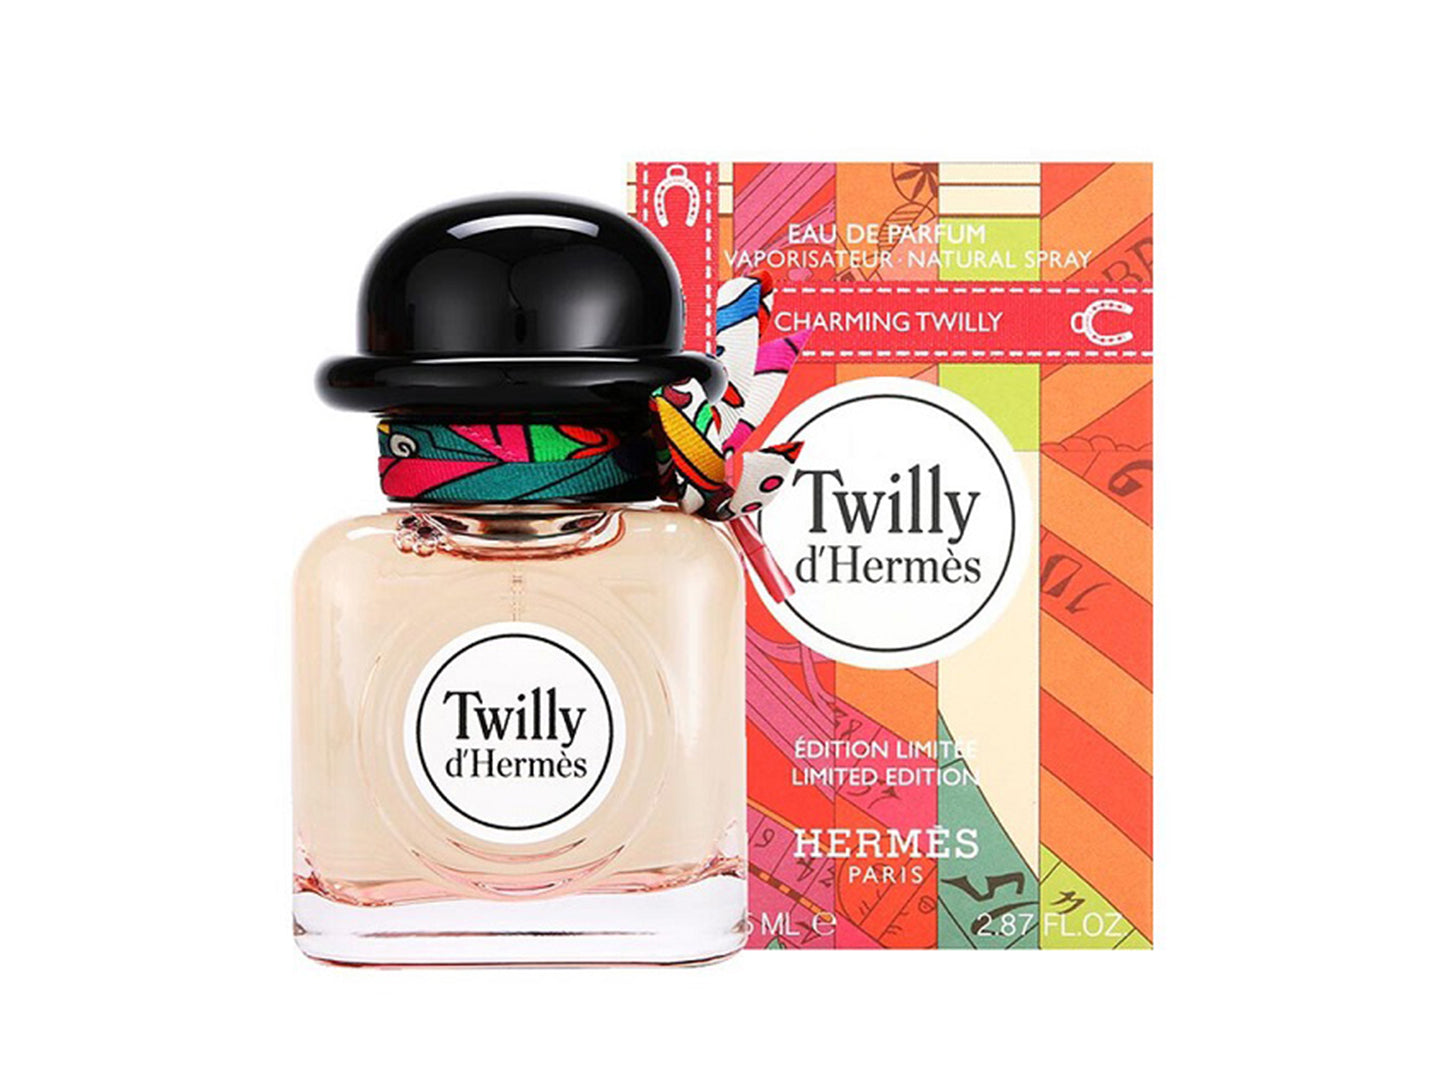 Twilly d'Hermes Eau de parfum Charming Twilly limited edition